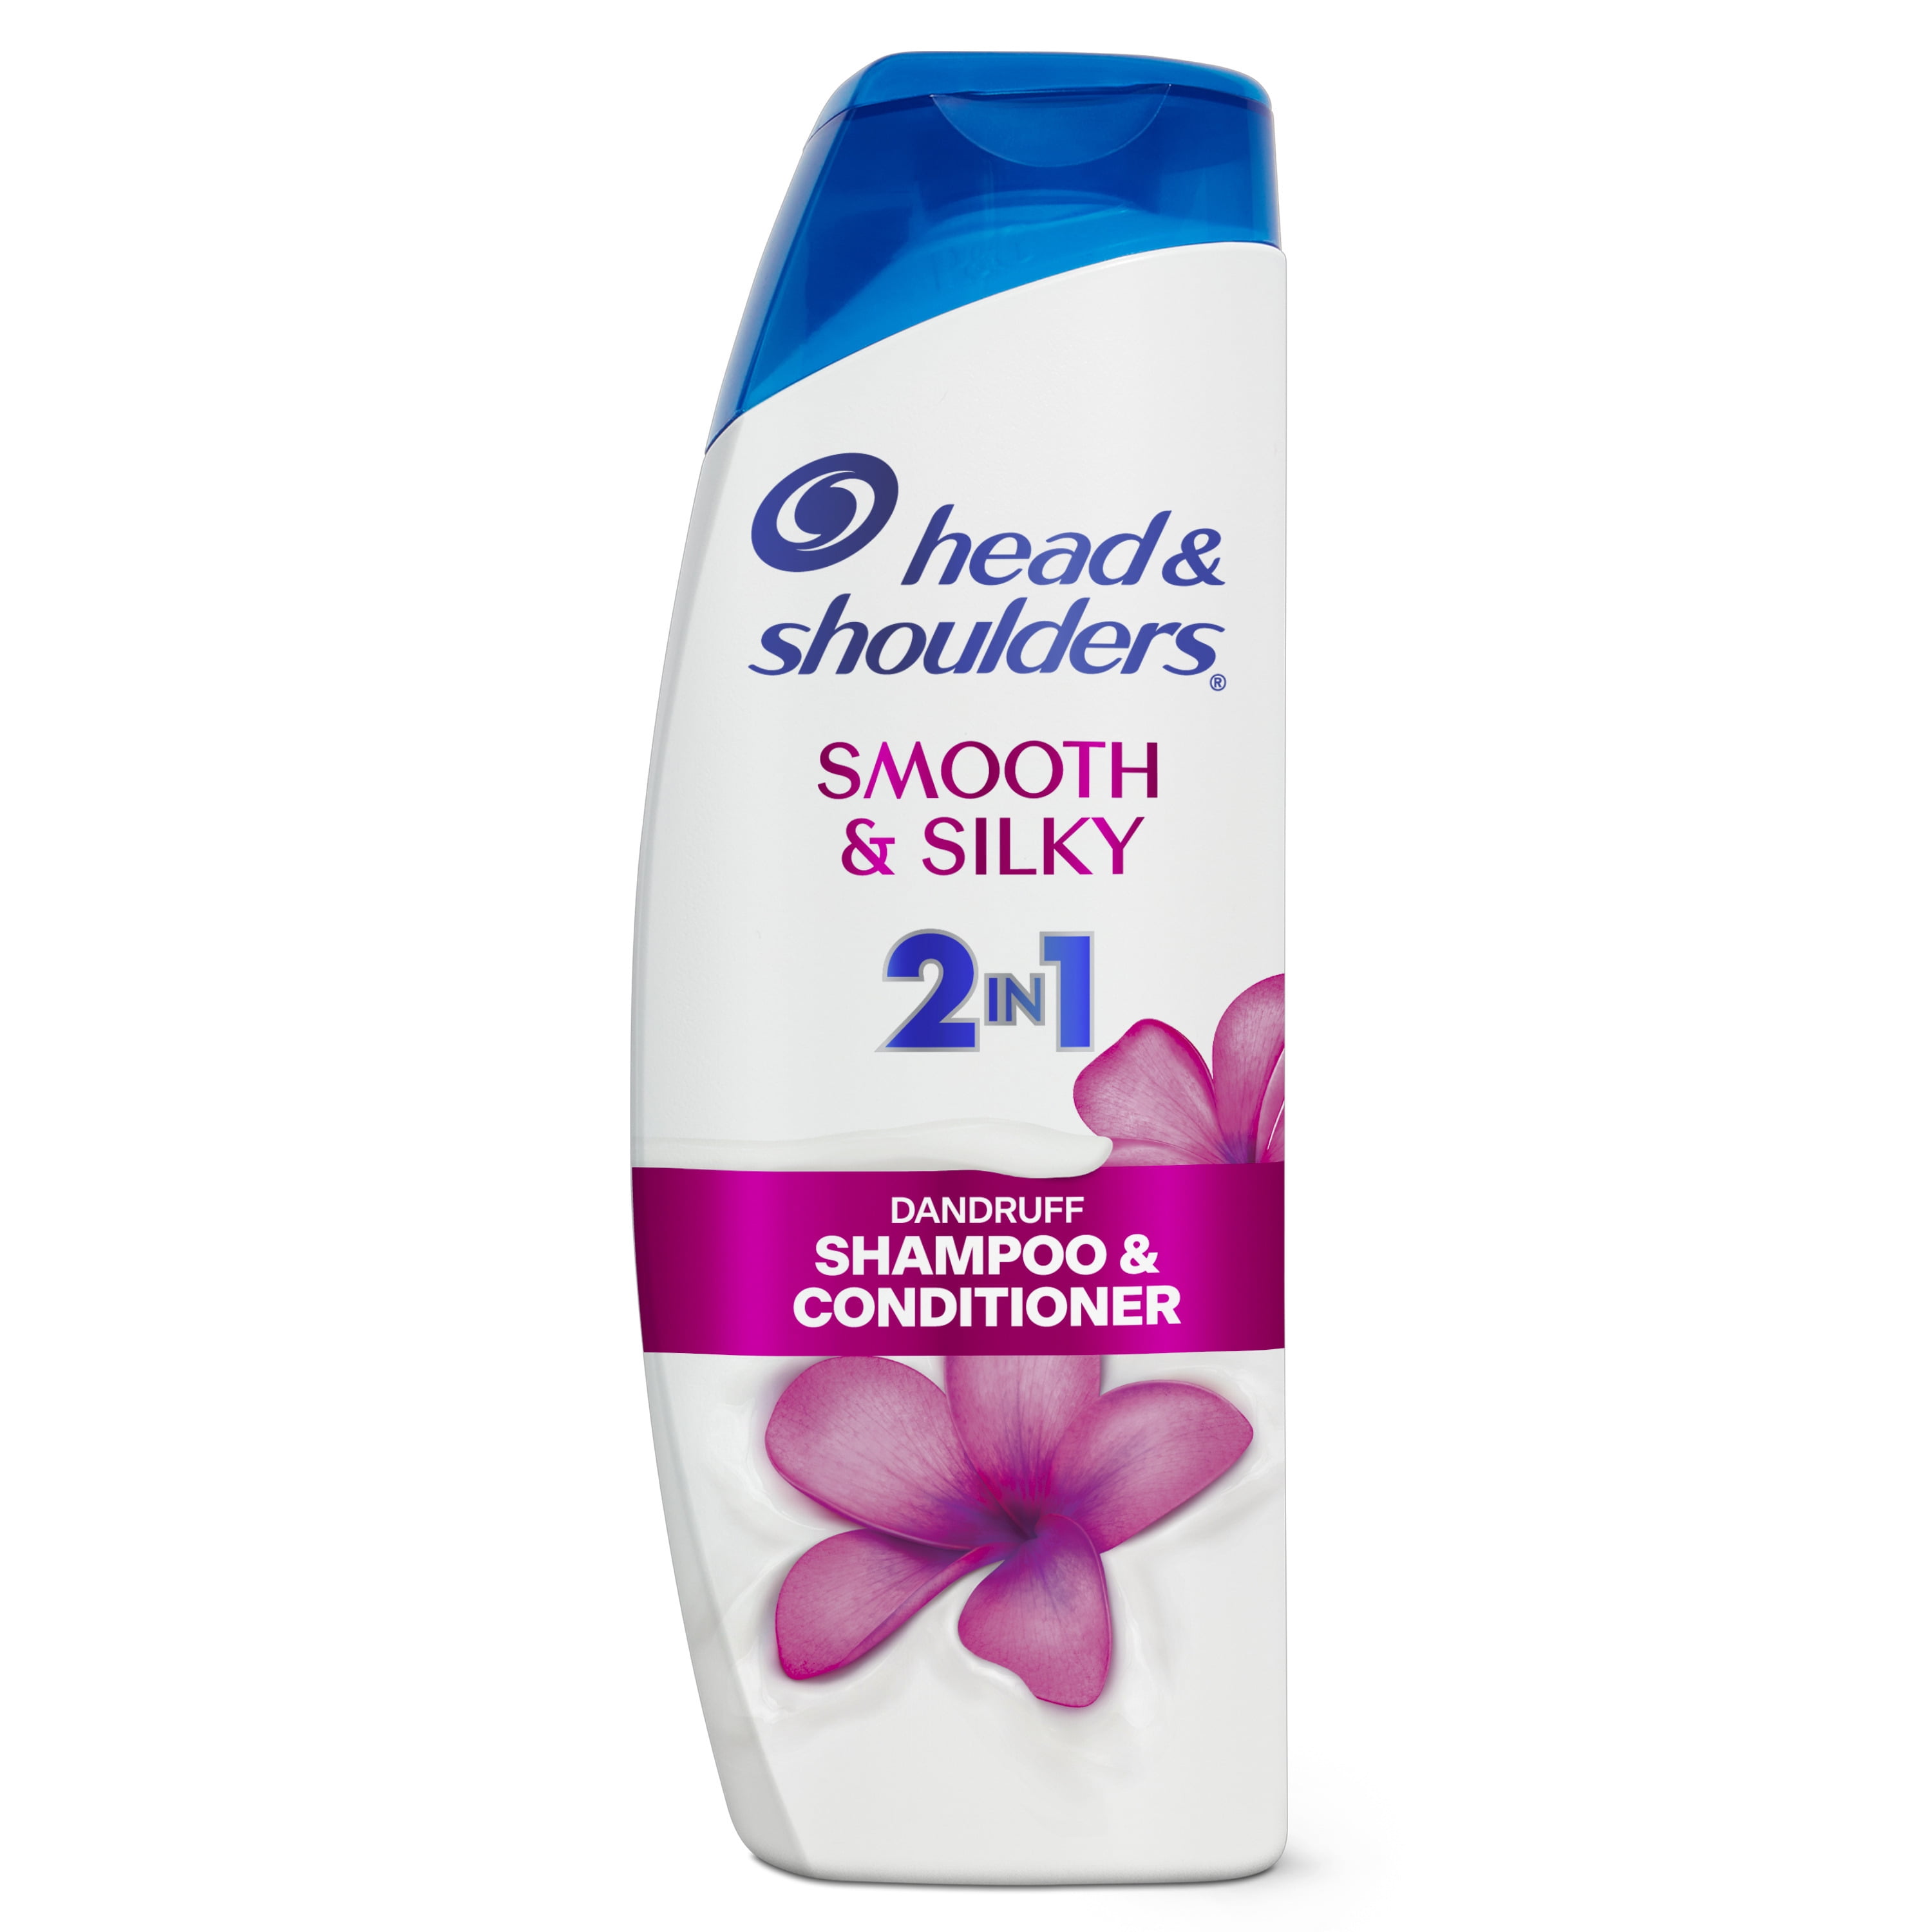 Head and Shoulders 2 in 1 Dandruff Shampoo and Conditioner, Smooth and Silky, 12.5 oz